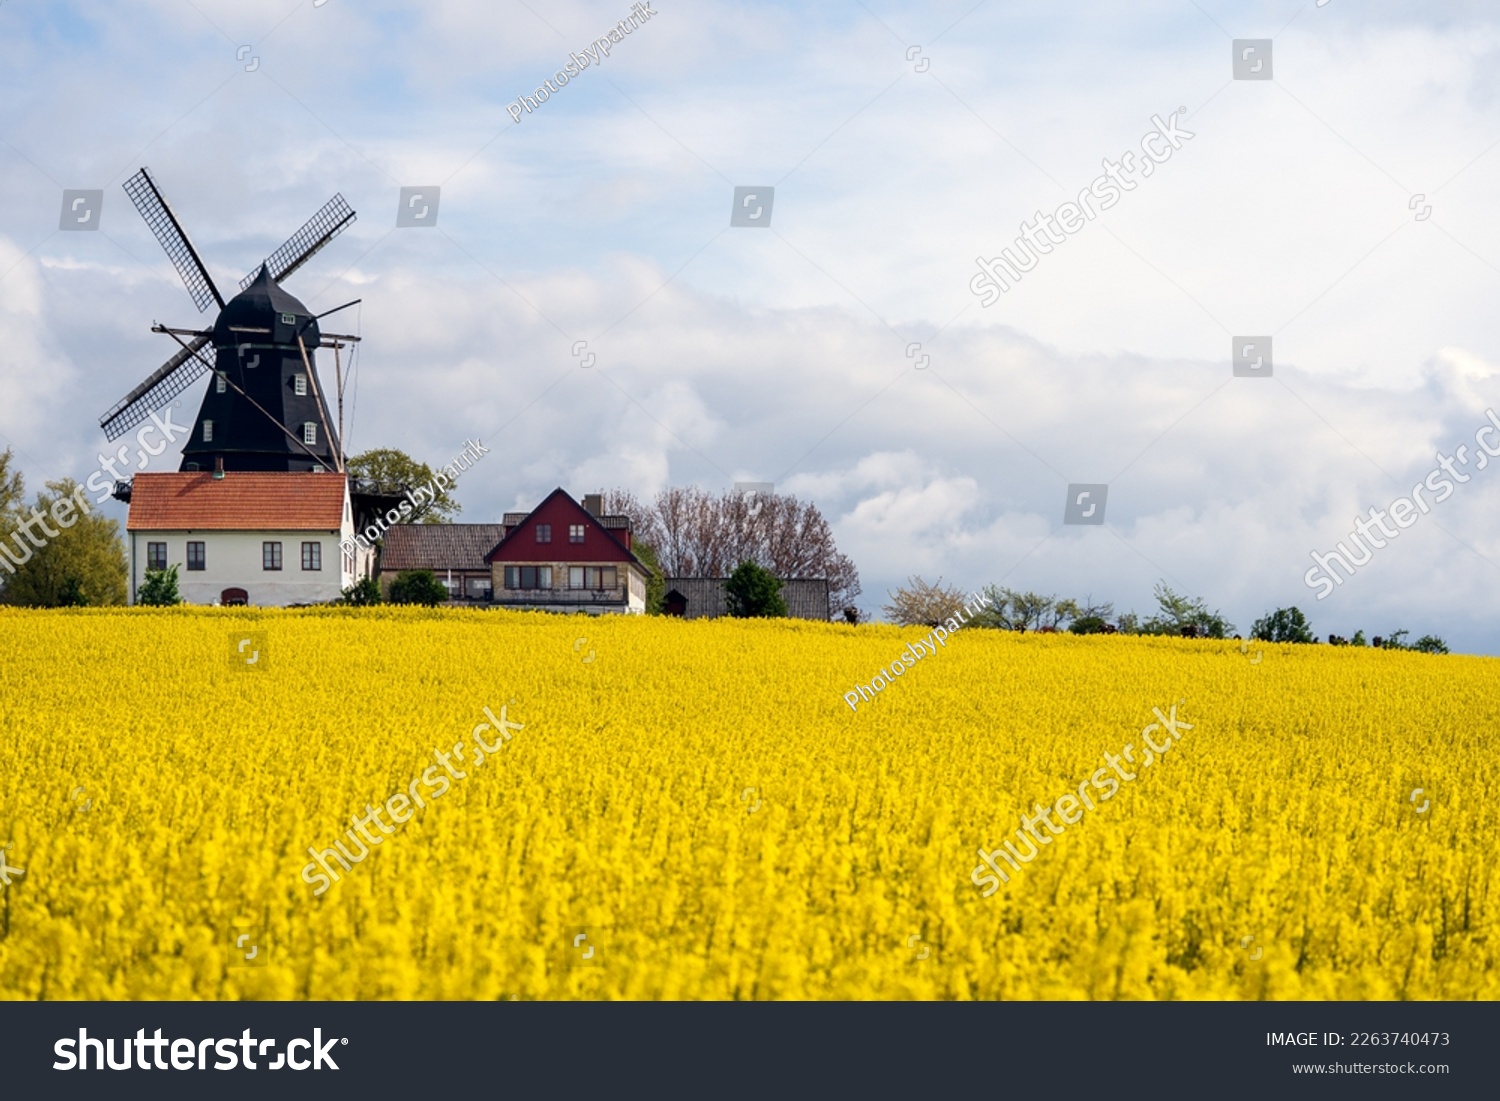 Rapeseed field with old traditional windmill in Malmo, Sweden. Selective focus. #2263740473